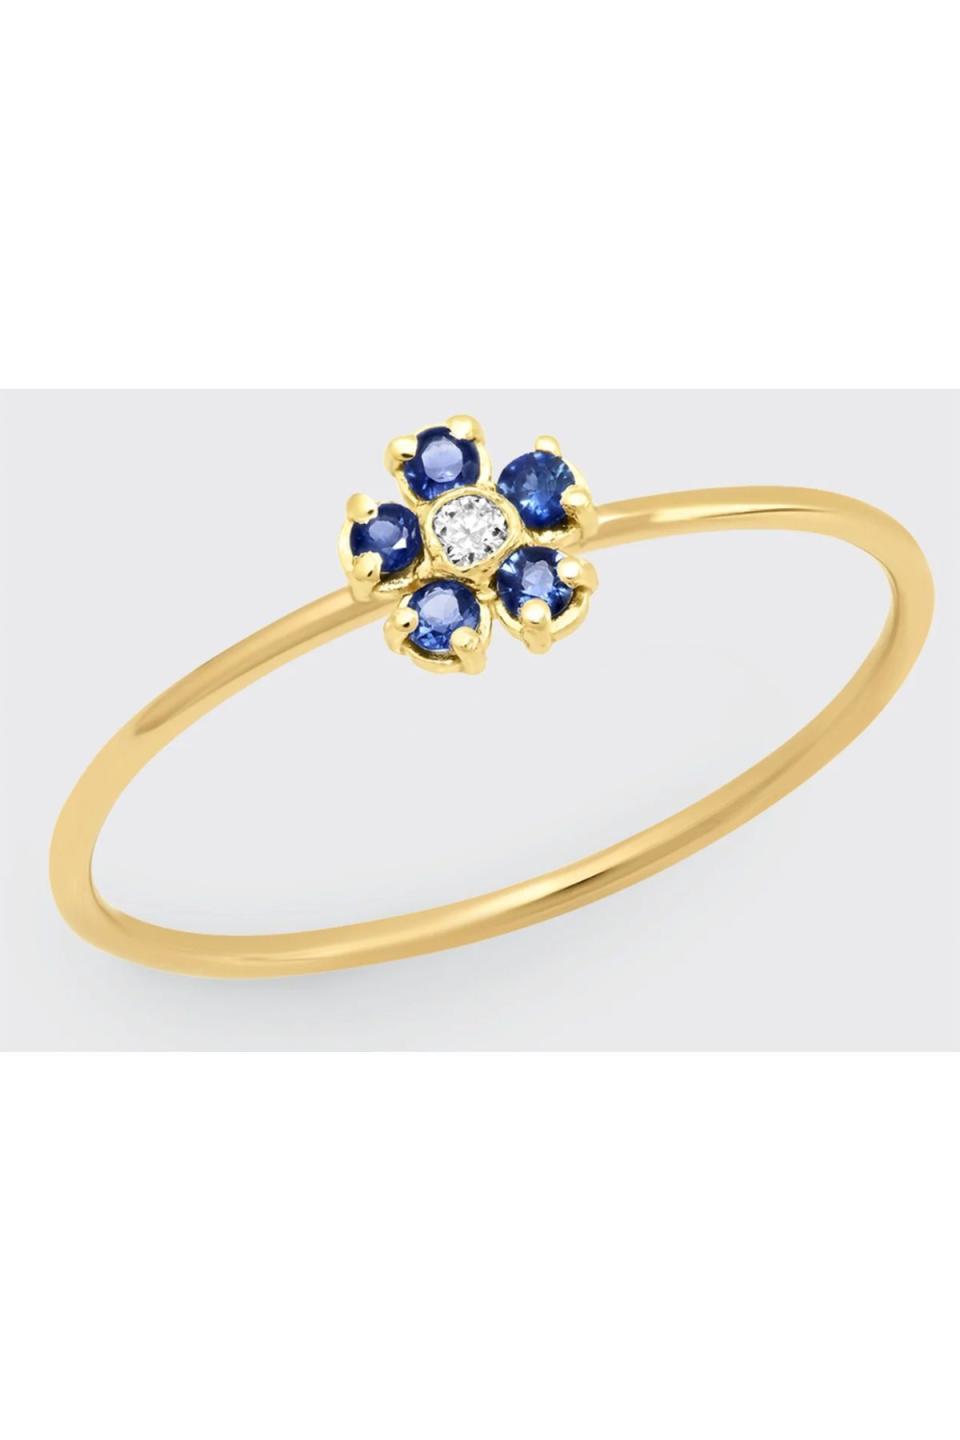 Blue Sapphire and Diamond Center Flower Ring in 18K Yellow Gold, Size 6.5